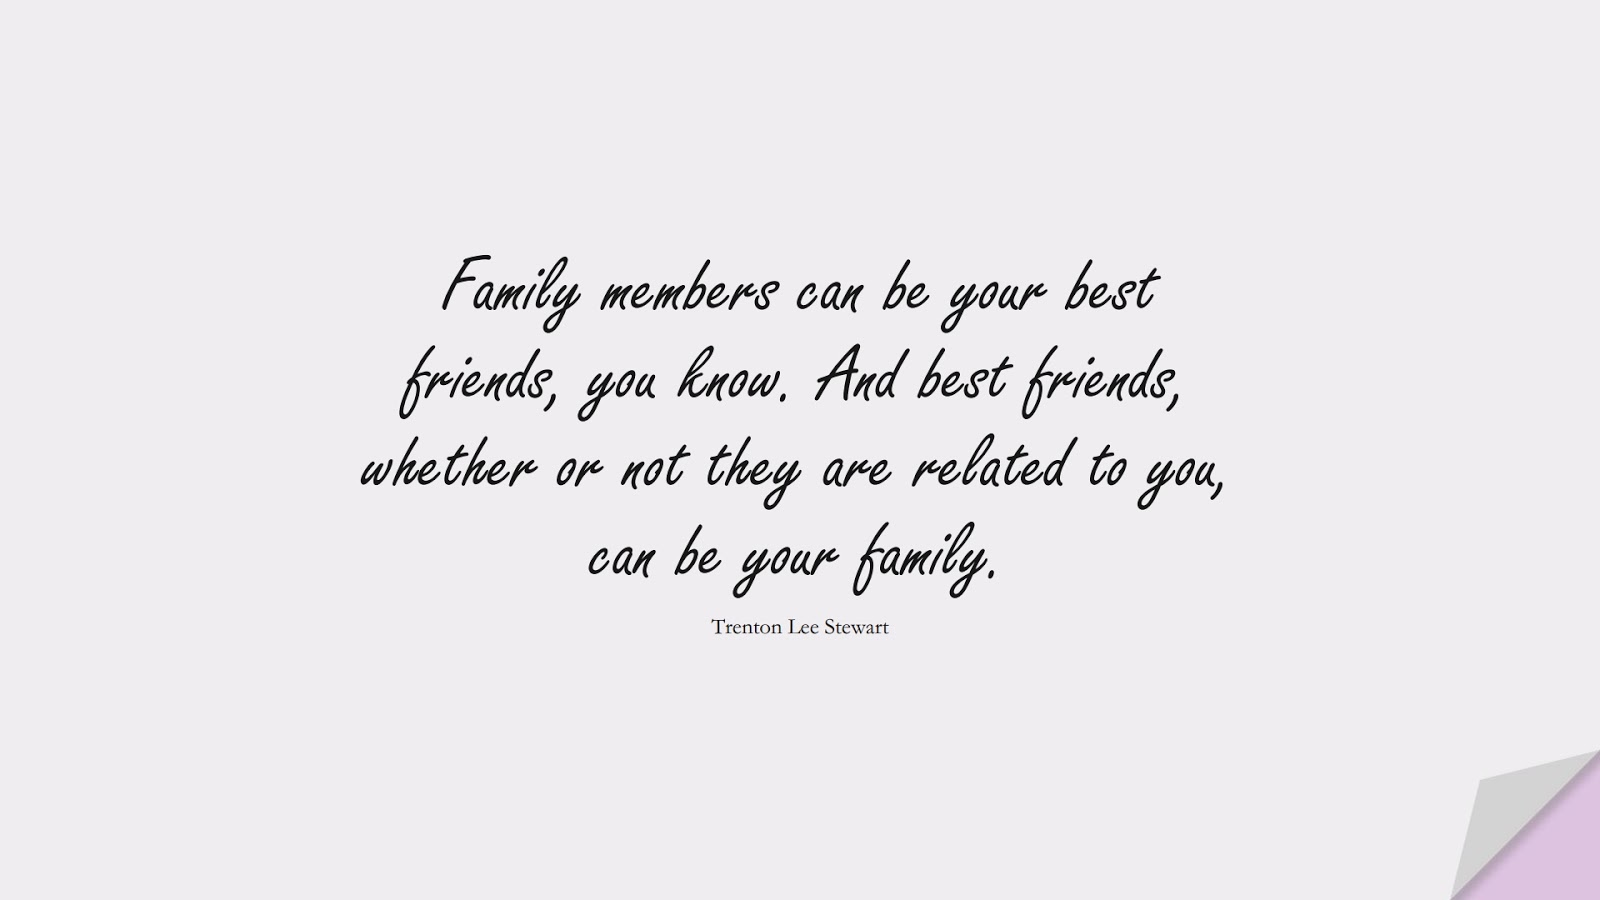 Family members can be your best friends, you know. And best friends, whether or not they are related to you, can be your family. (Trenton Lee Stewart);  #FamilyQuotes